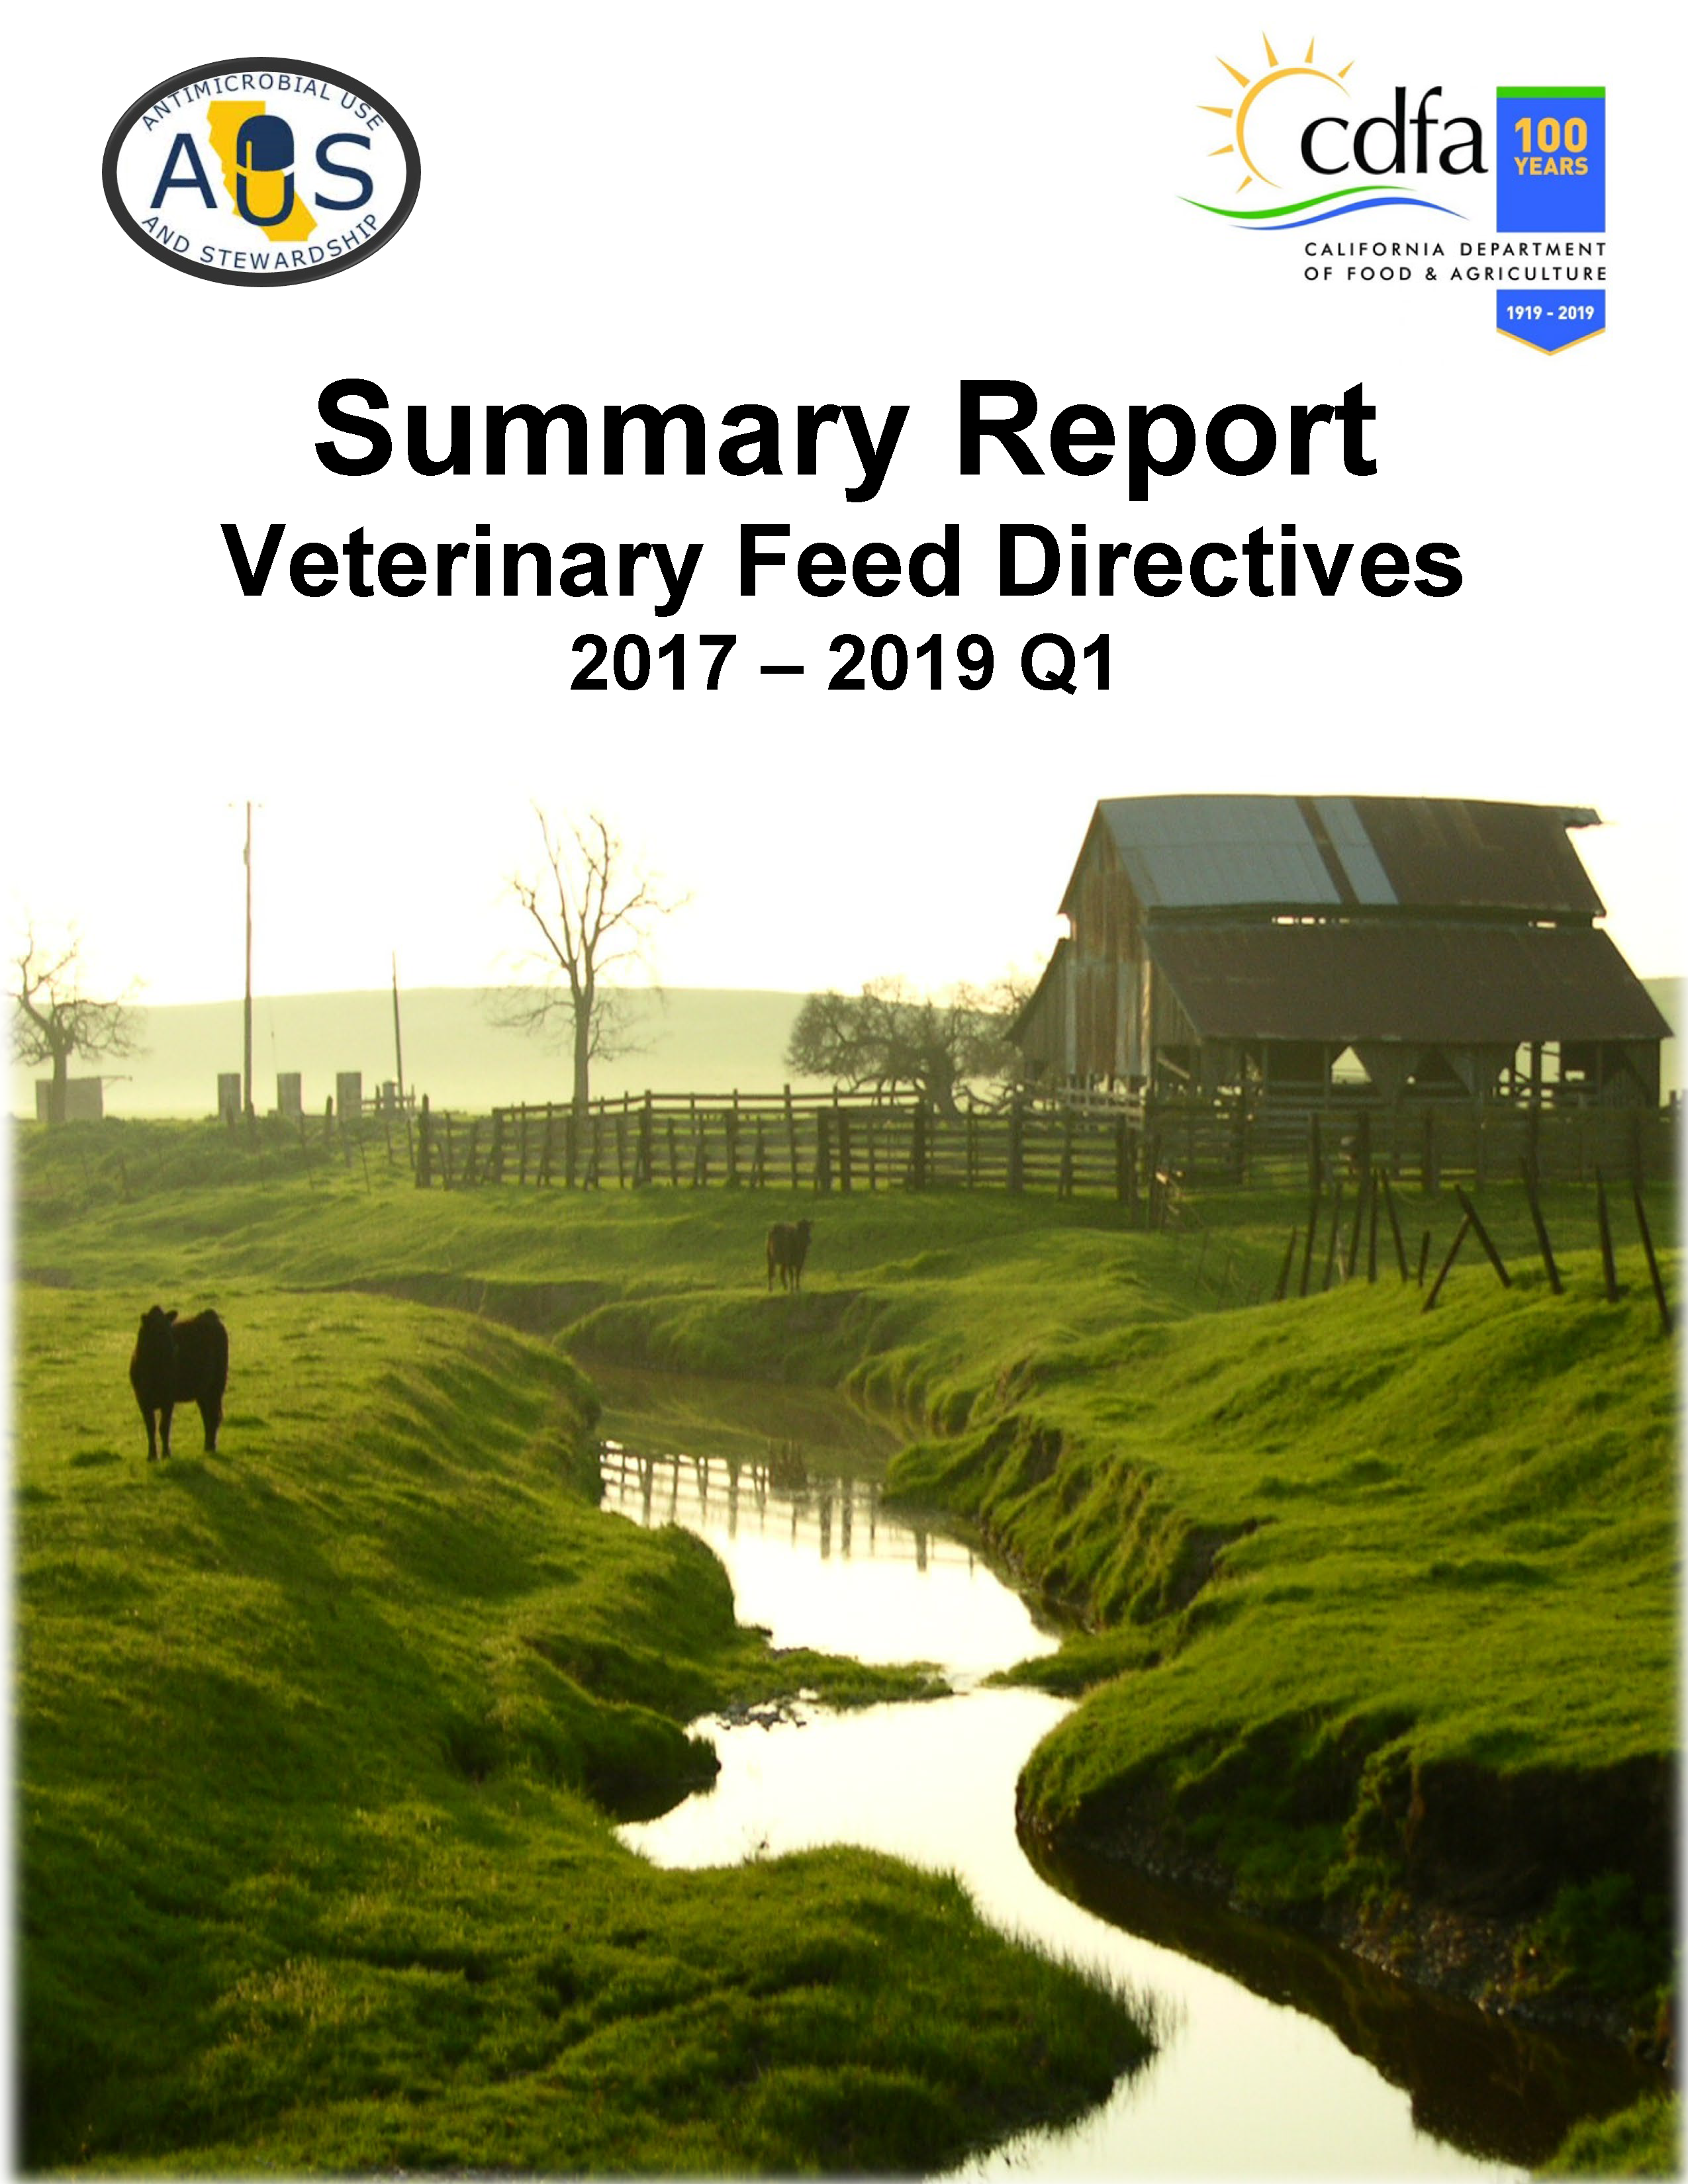 Annual Summary Report Veterinary Feed Directives 2019